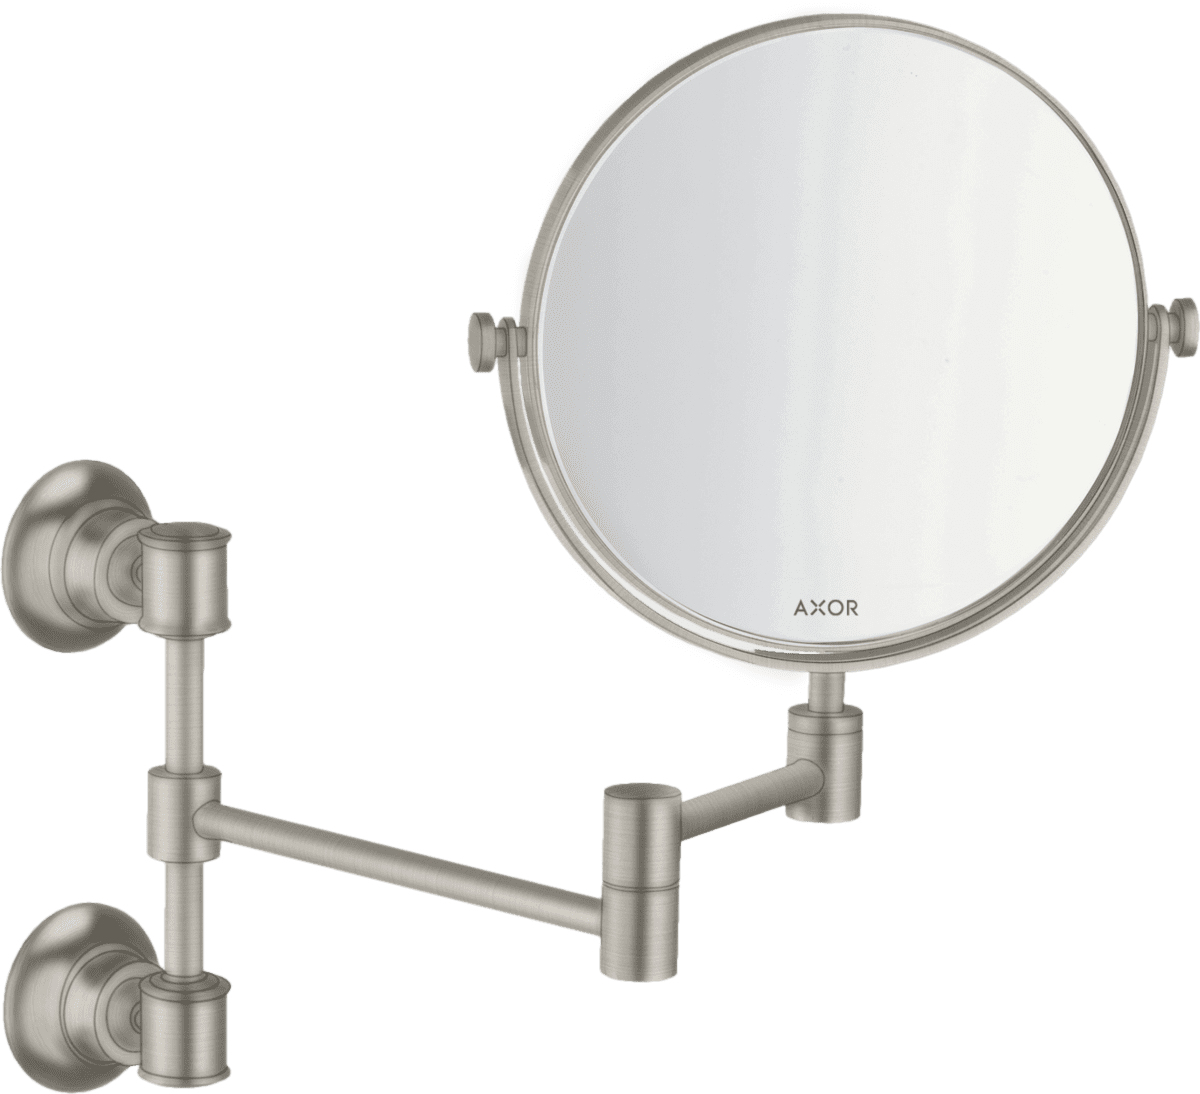 Picture of HANSGROHE AXOR Montreux Shaving mirror #42090800 - Stainless Steel Optic